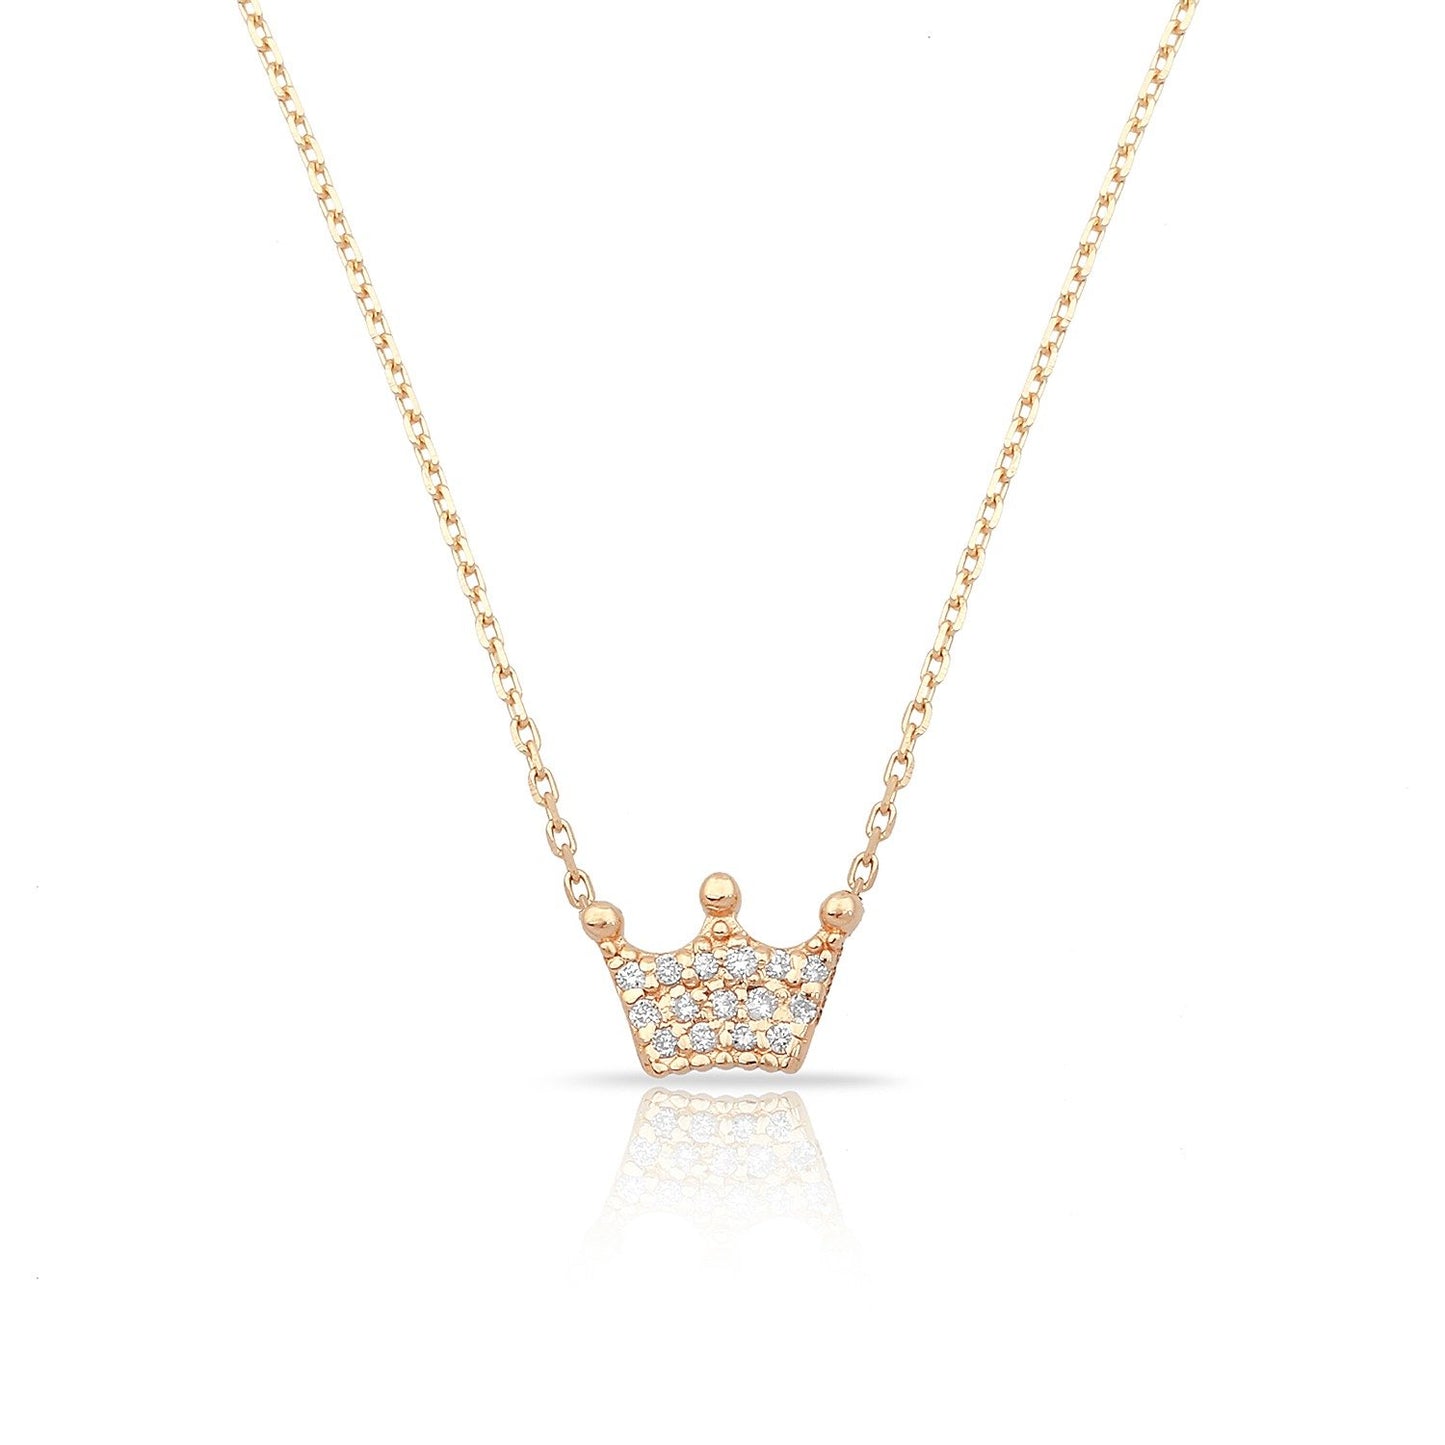 TSK Diamond Crown Necklace JEWELRY The Sis Kiss 14k Rose Gold